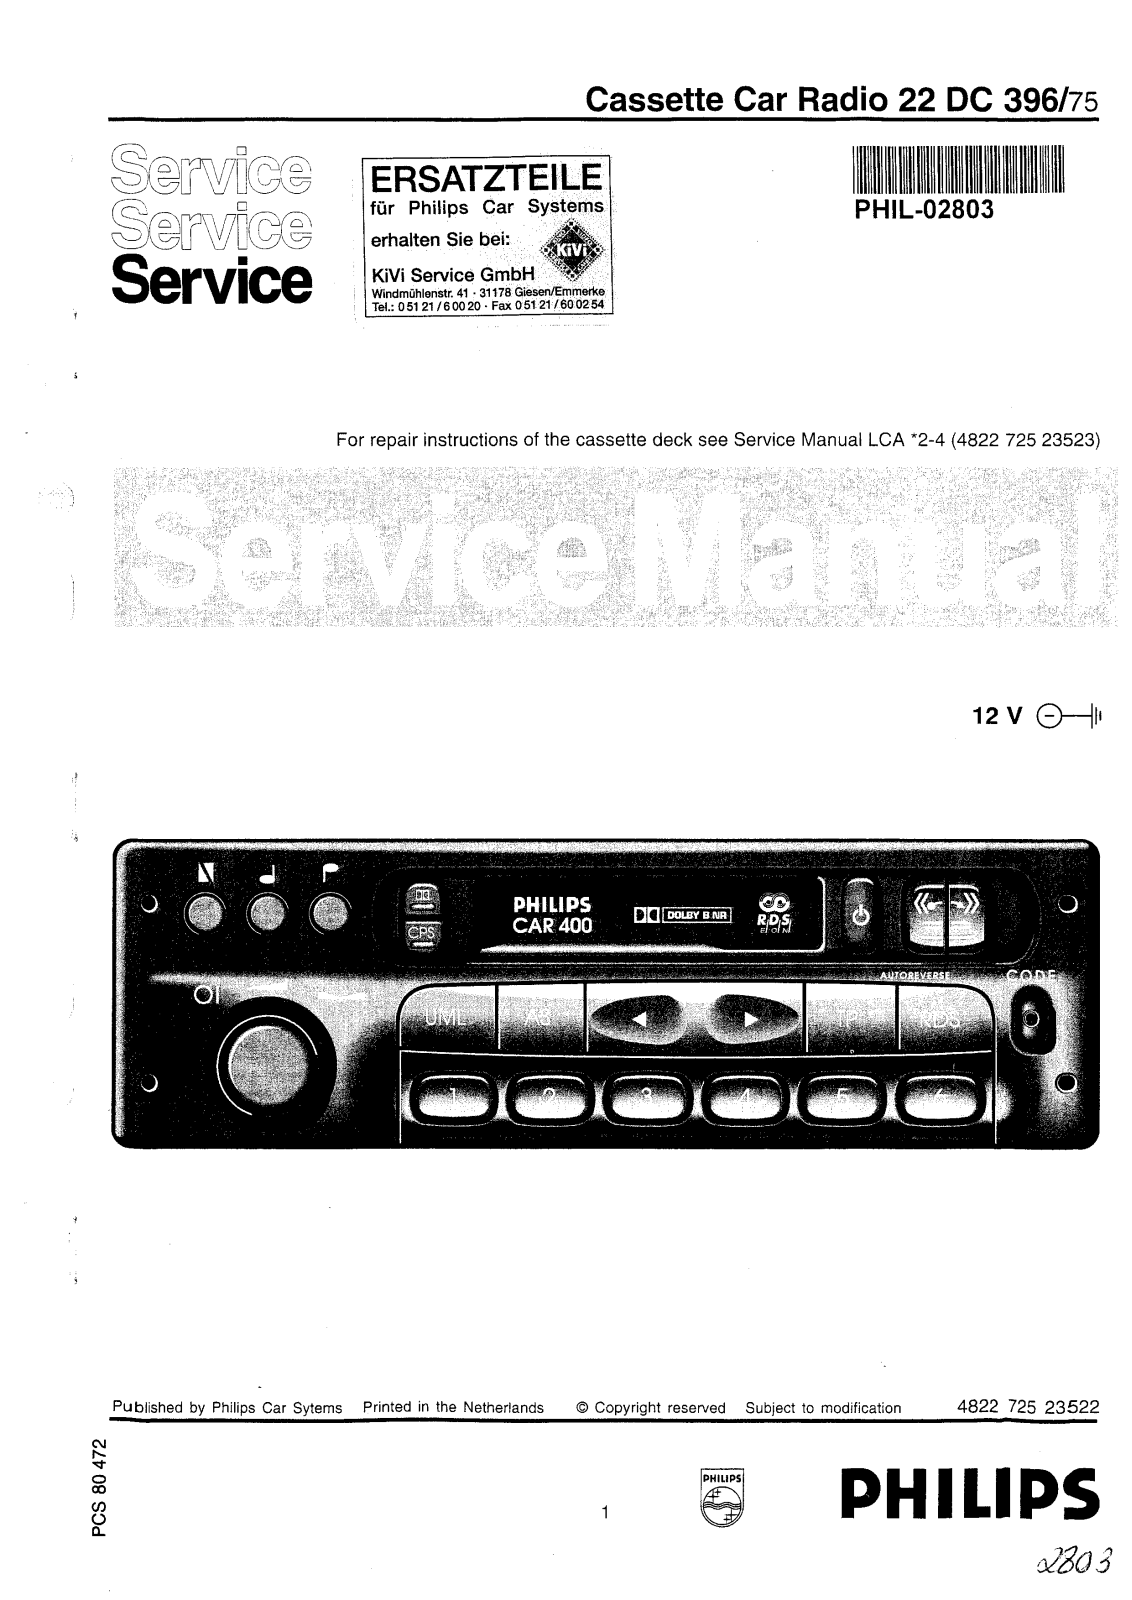 Philips DC-396 Service manual